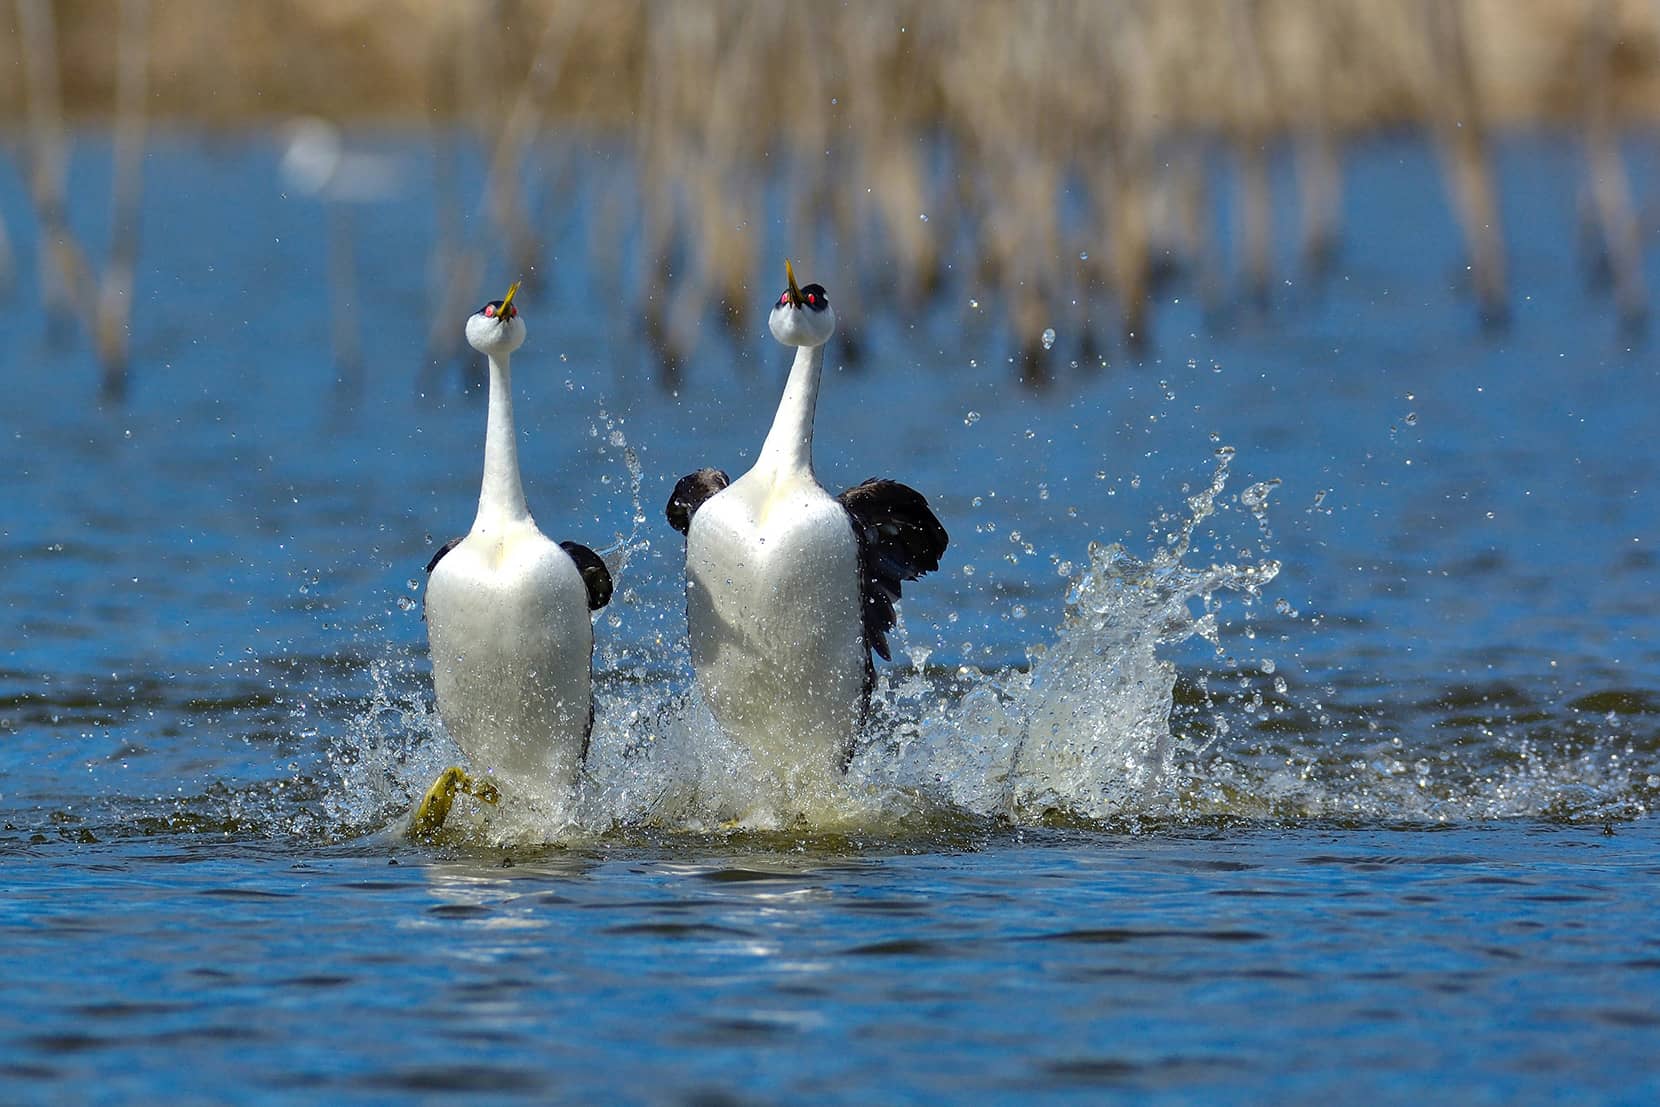 Grebes courtship dance in the water